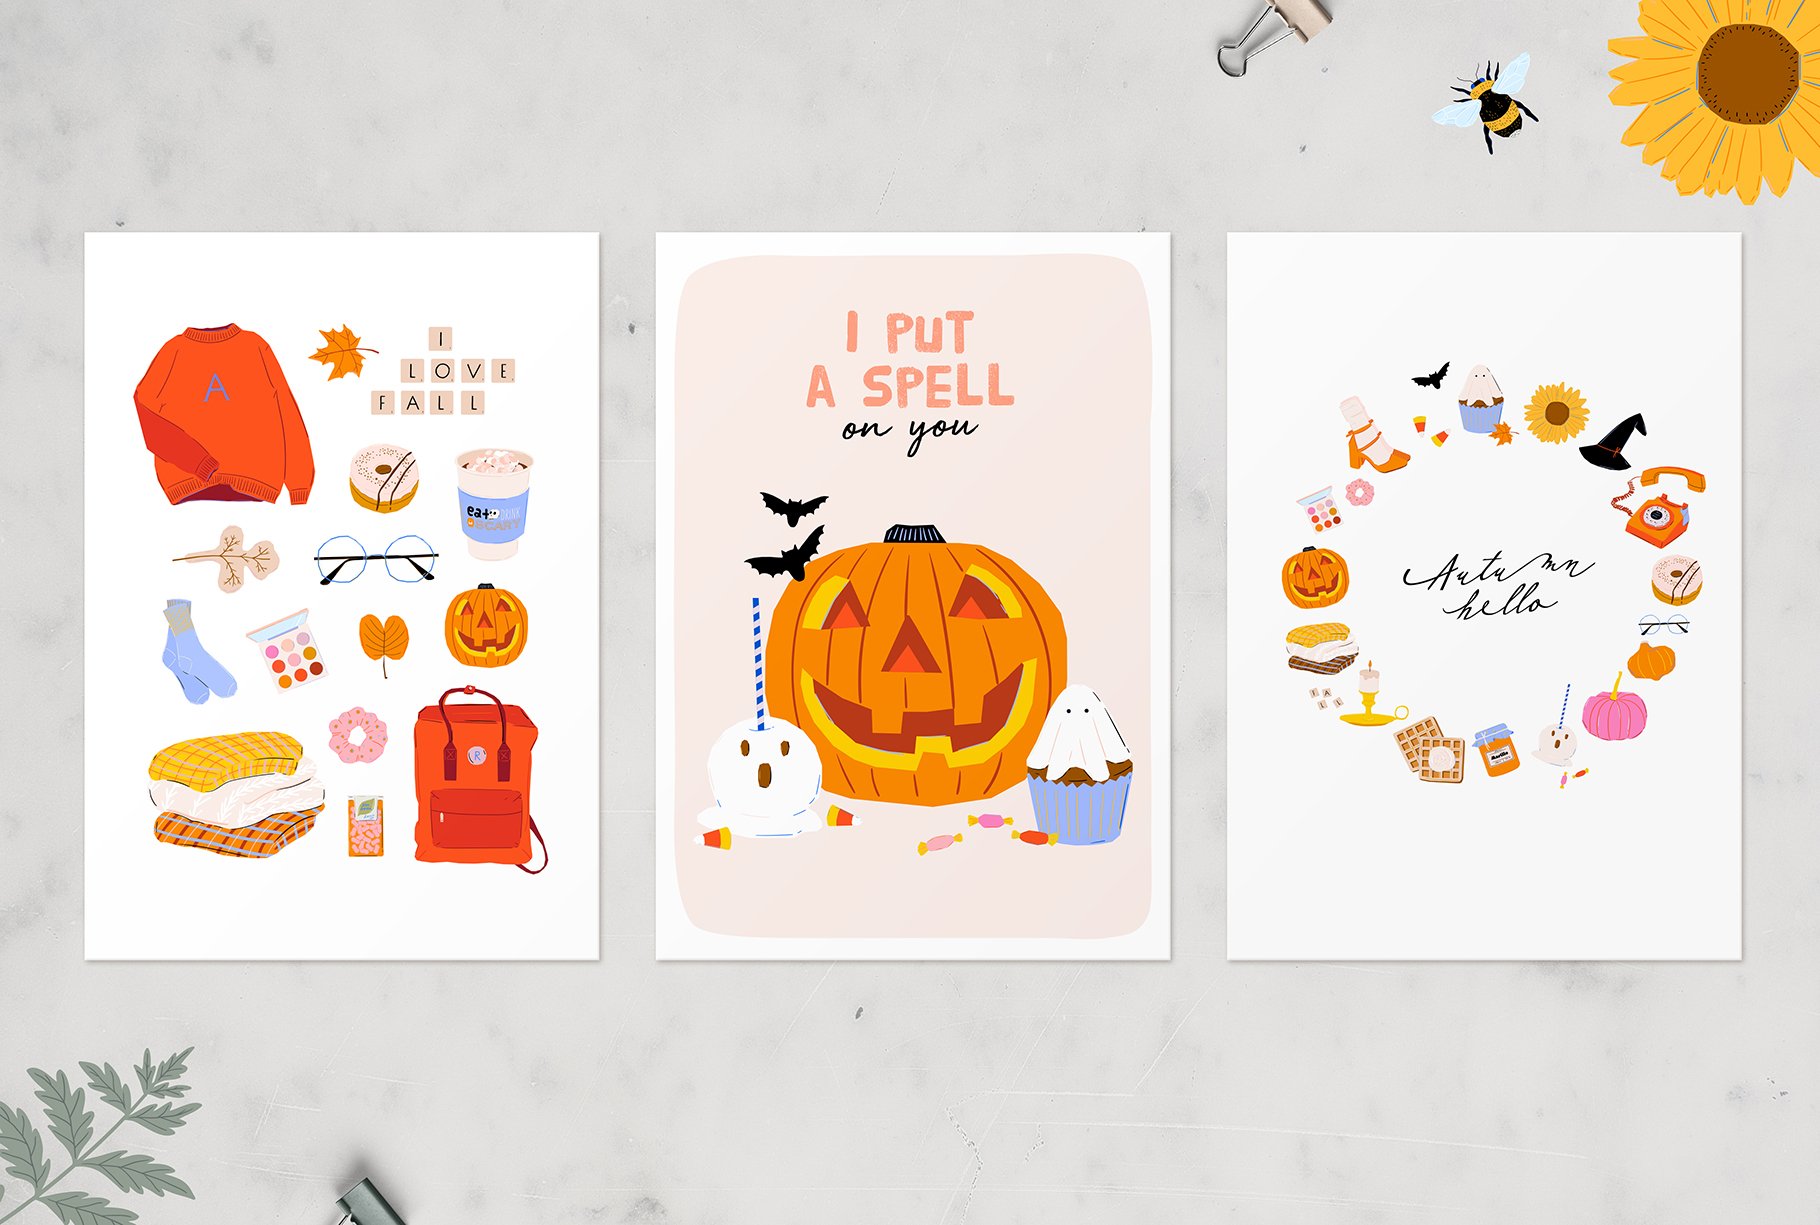 Some cards for Halloween or other autumn holidays.